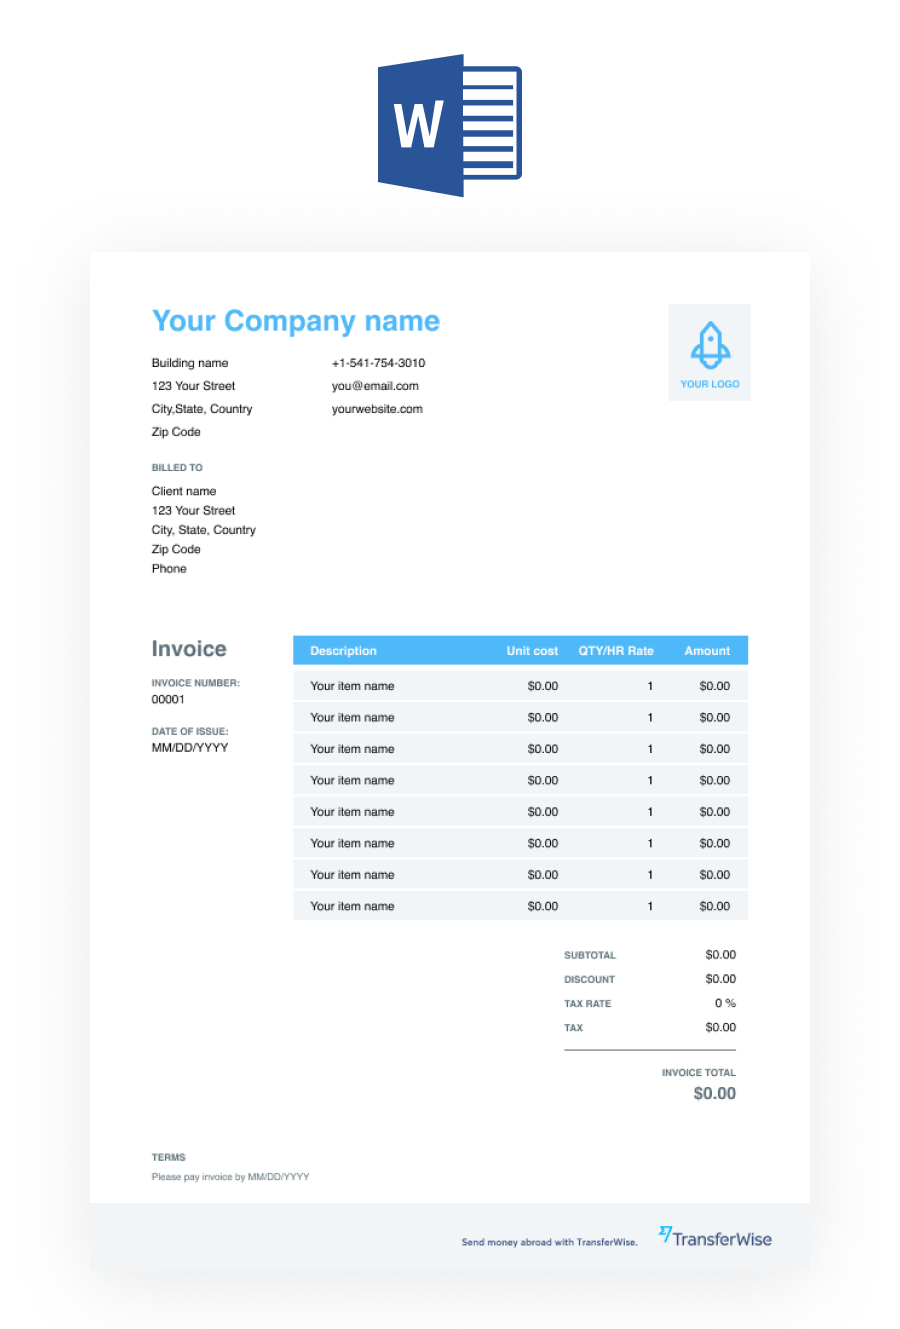 Free Invoice Template – Download And Send Invoices Easily In Rate Card Template Word